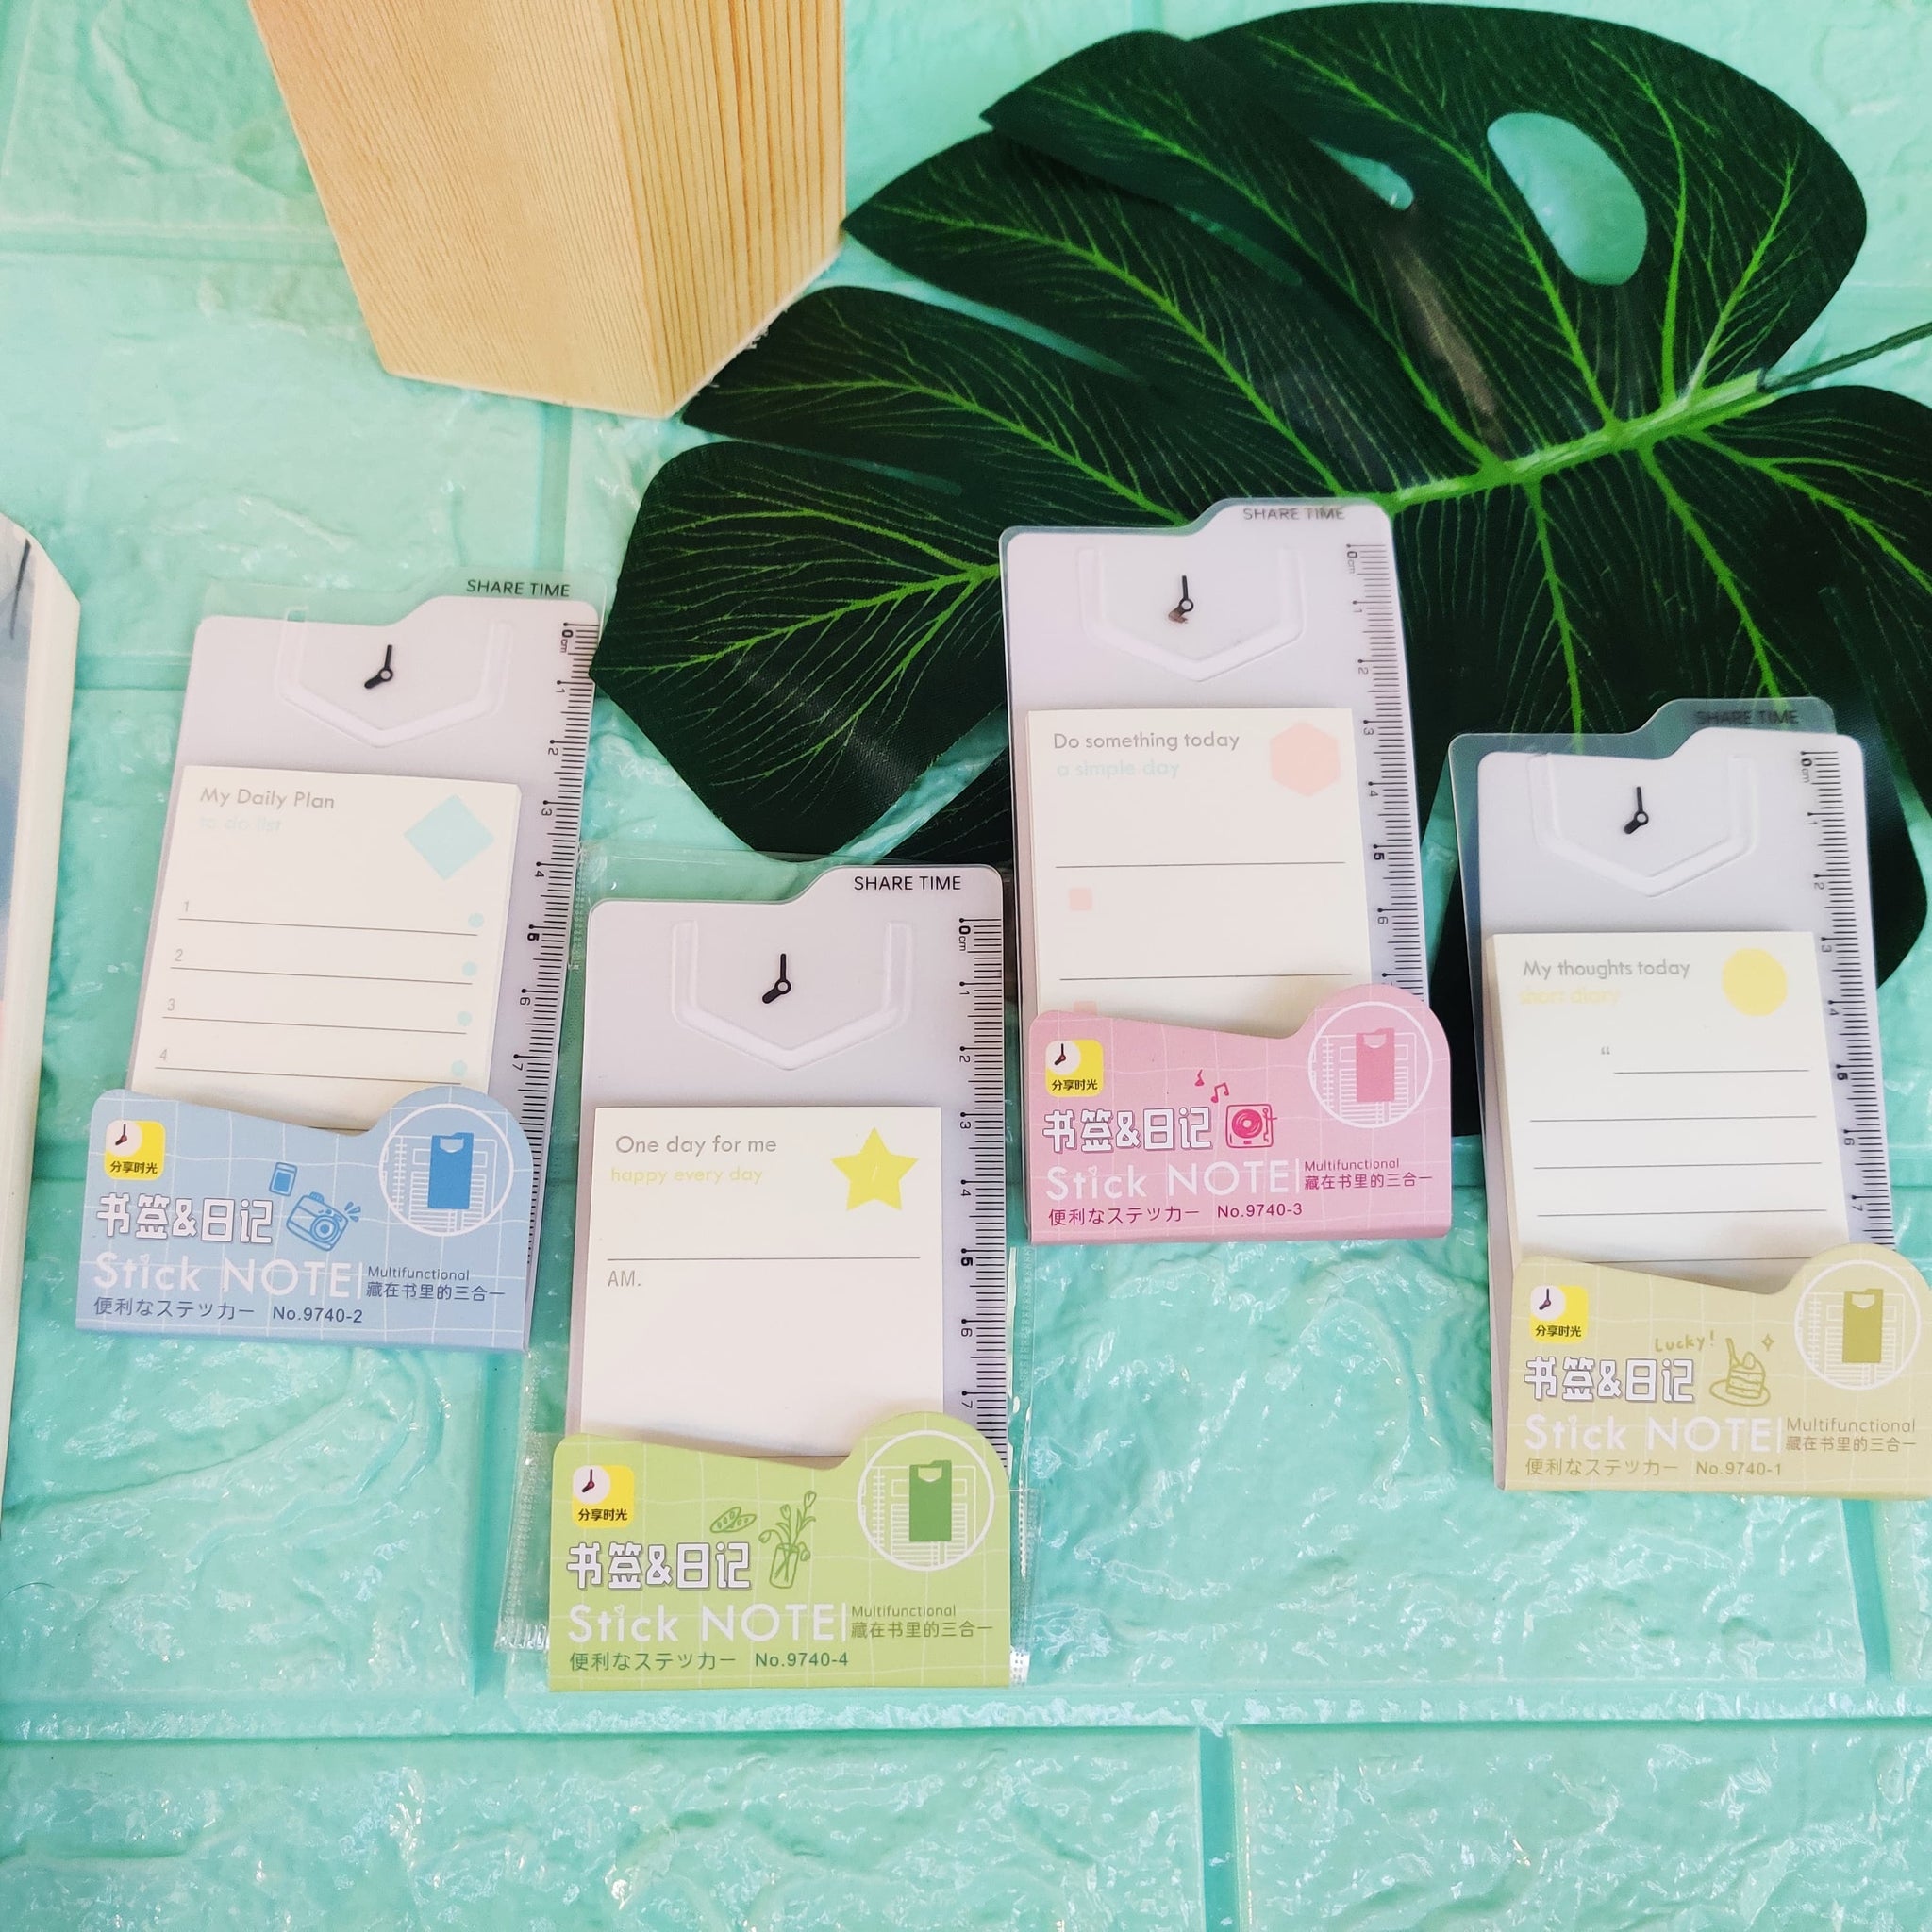 UB collection/Shop rahega. Mini TO-DO Post it Sticky Notes | get organised with sticky Notes | 32 Sheets |